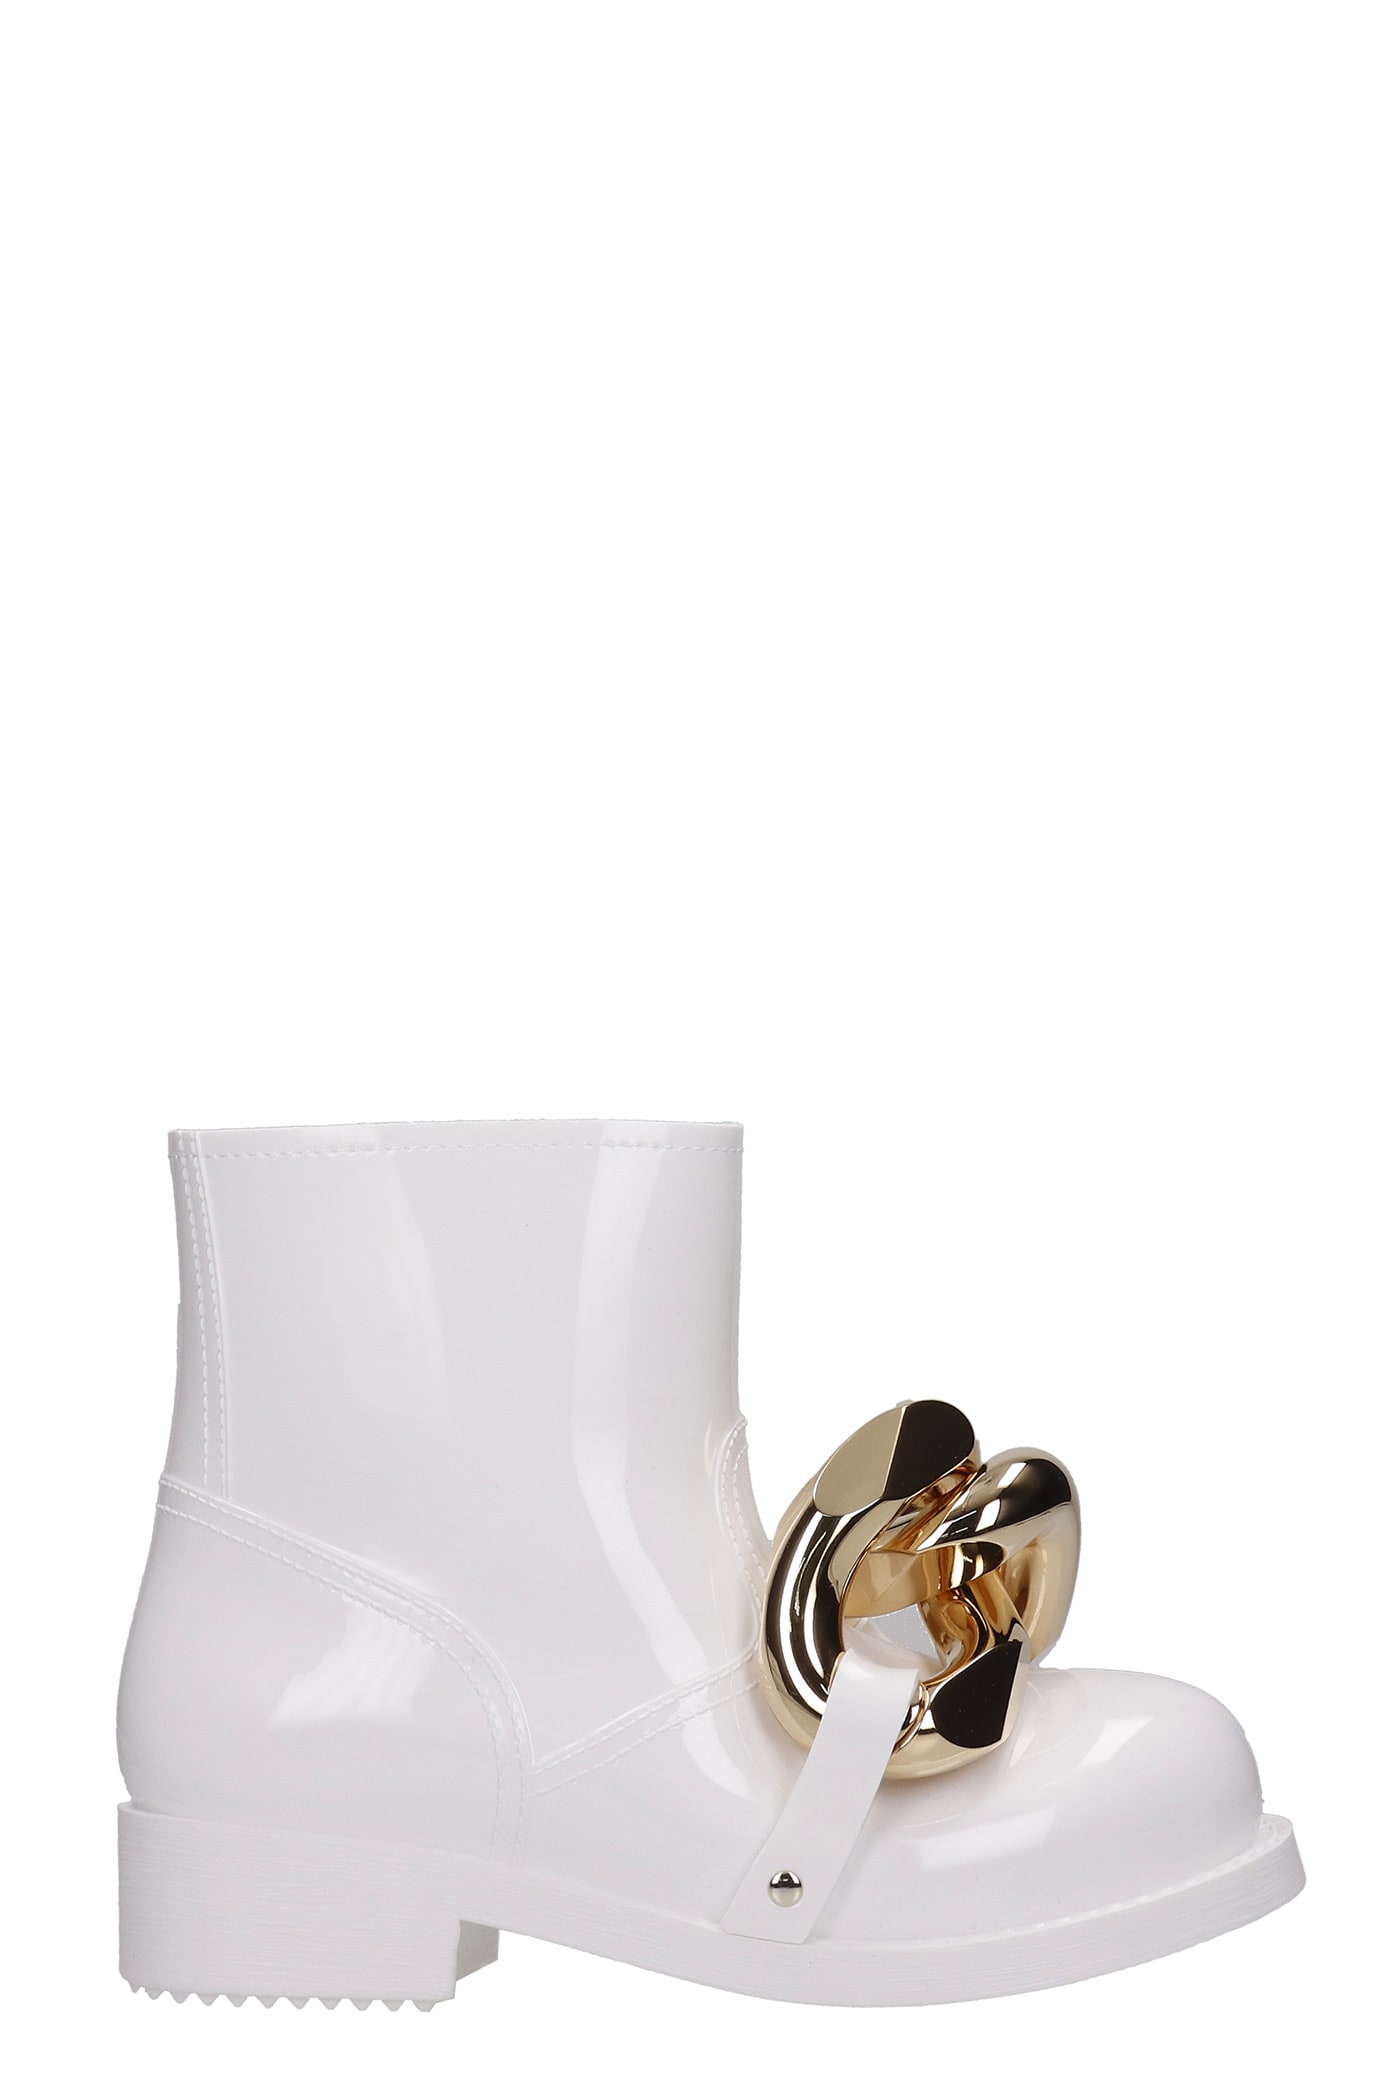 J.W. Anderson Low Heels Ankle Boots In White Rubber/plasic